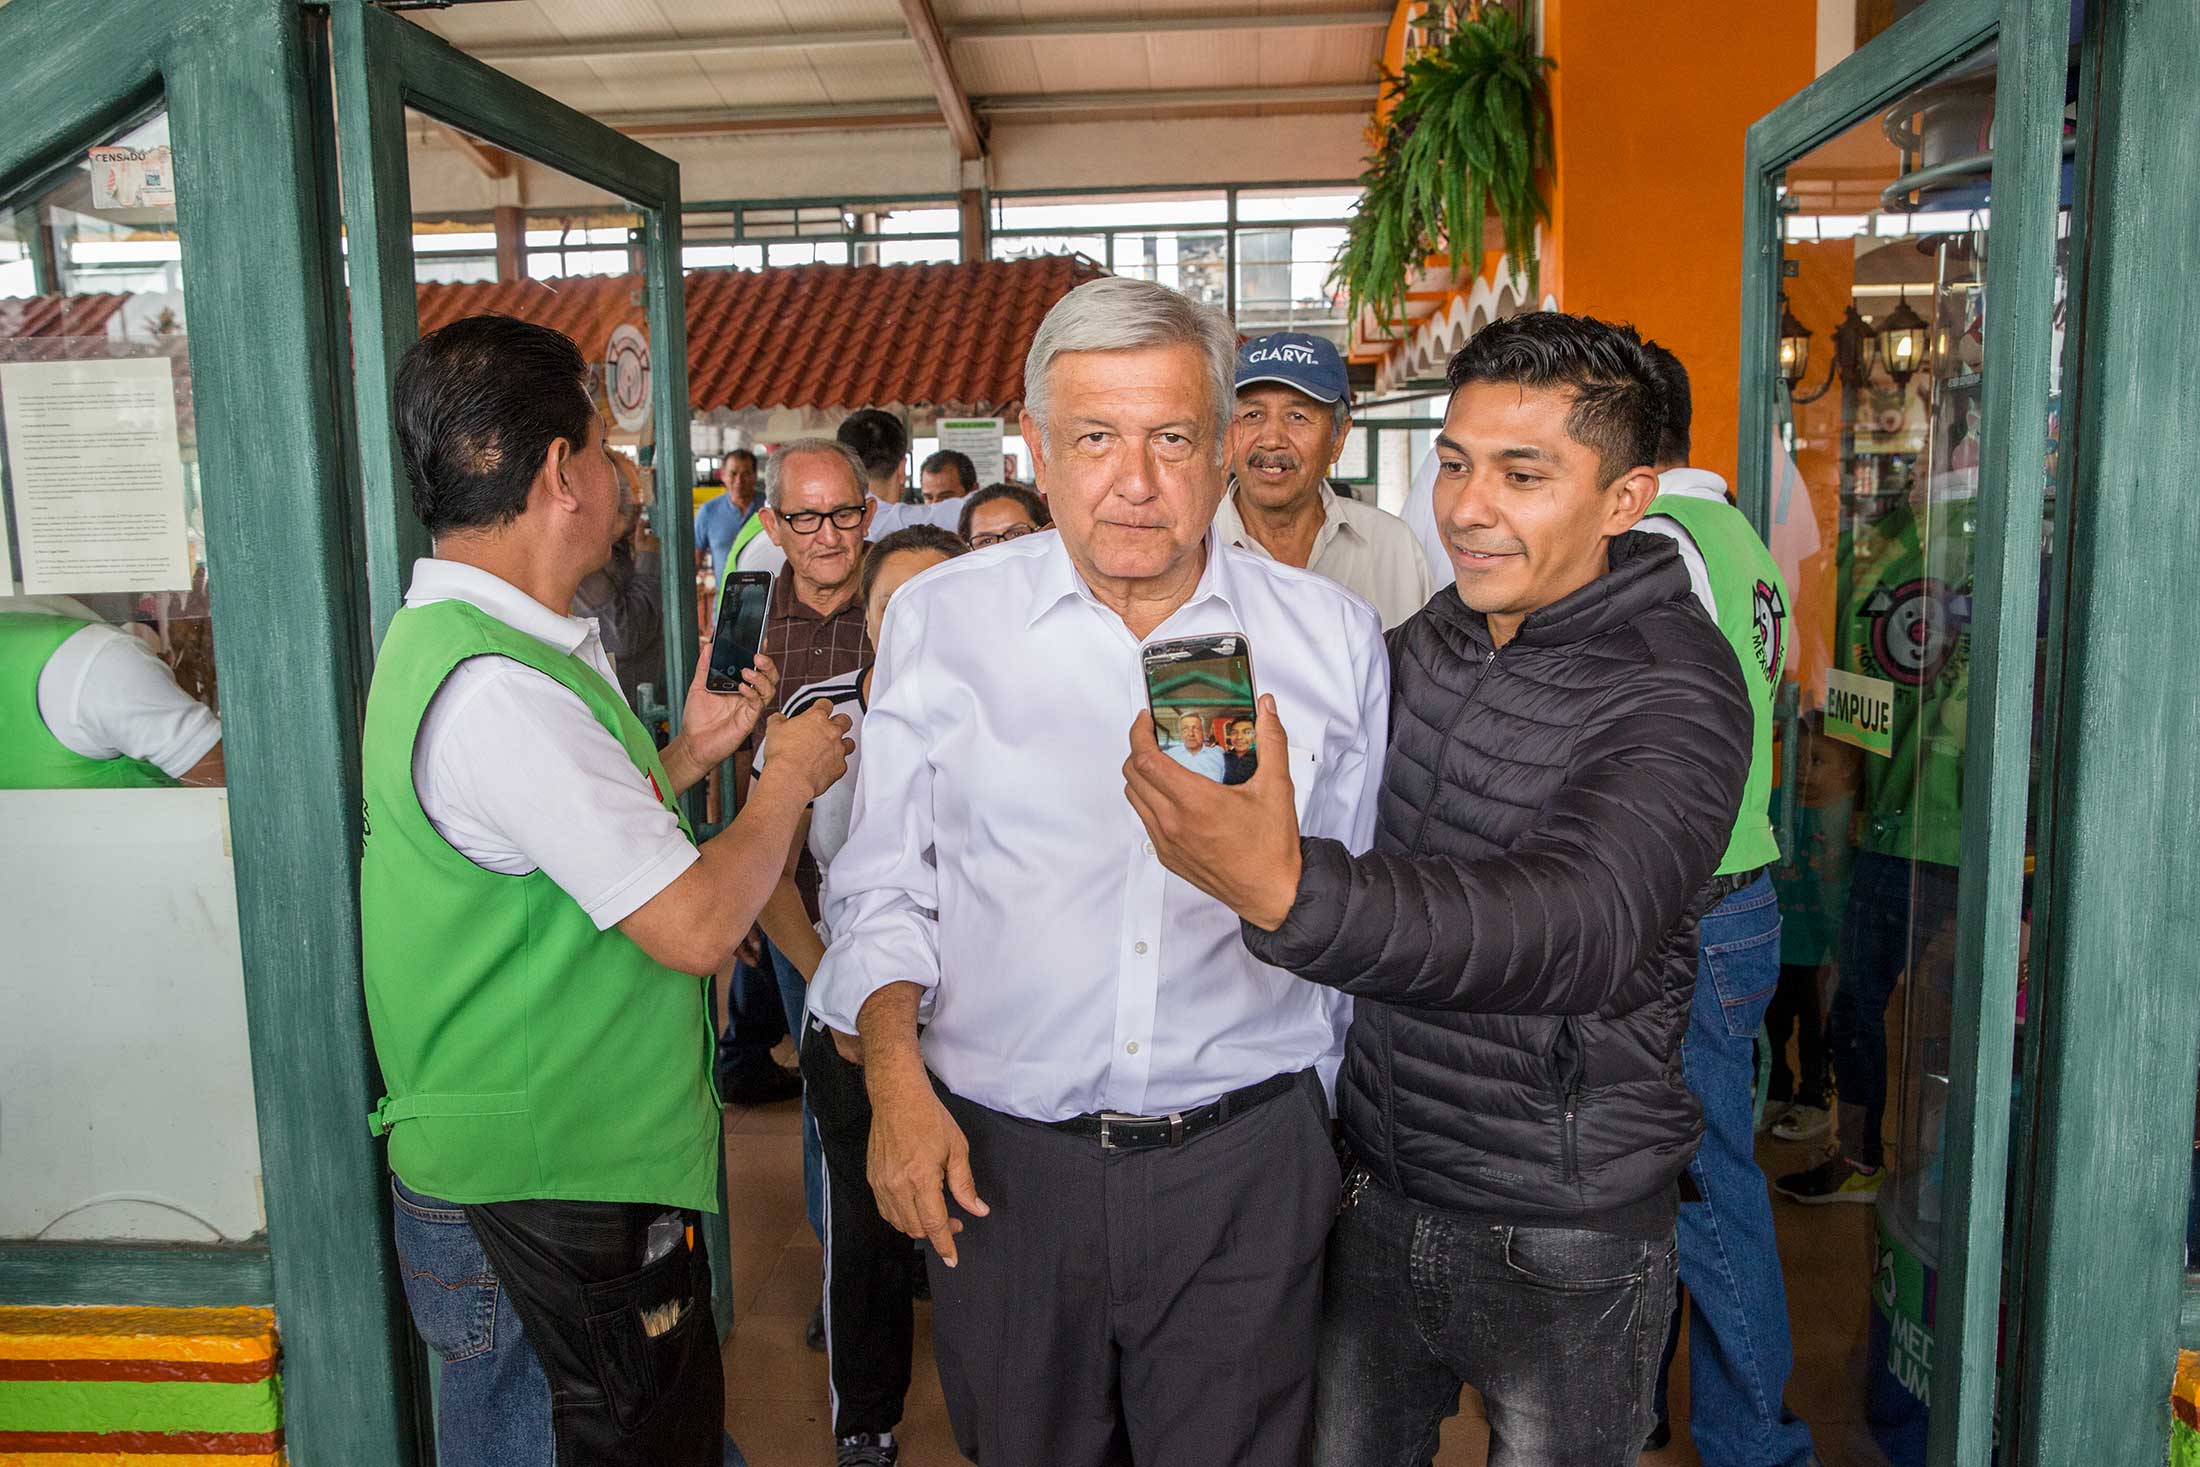 Andrés Manuel López Obrador, leader of the Morena political party and candidate for president of Mexico, leaves a restaurant surrounded by fans in Ixtapaluca, near Mexico City, on April 23, 2018.